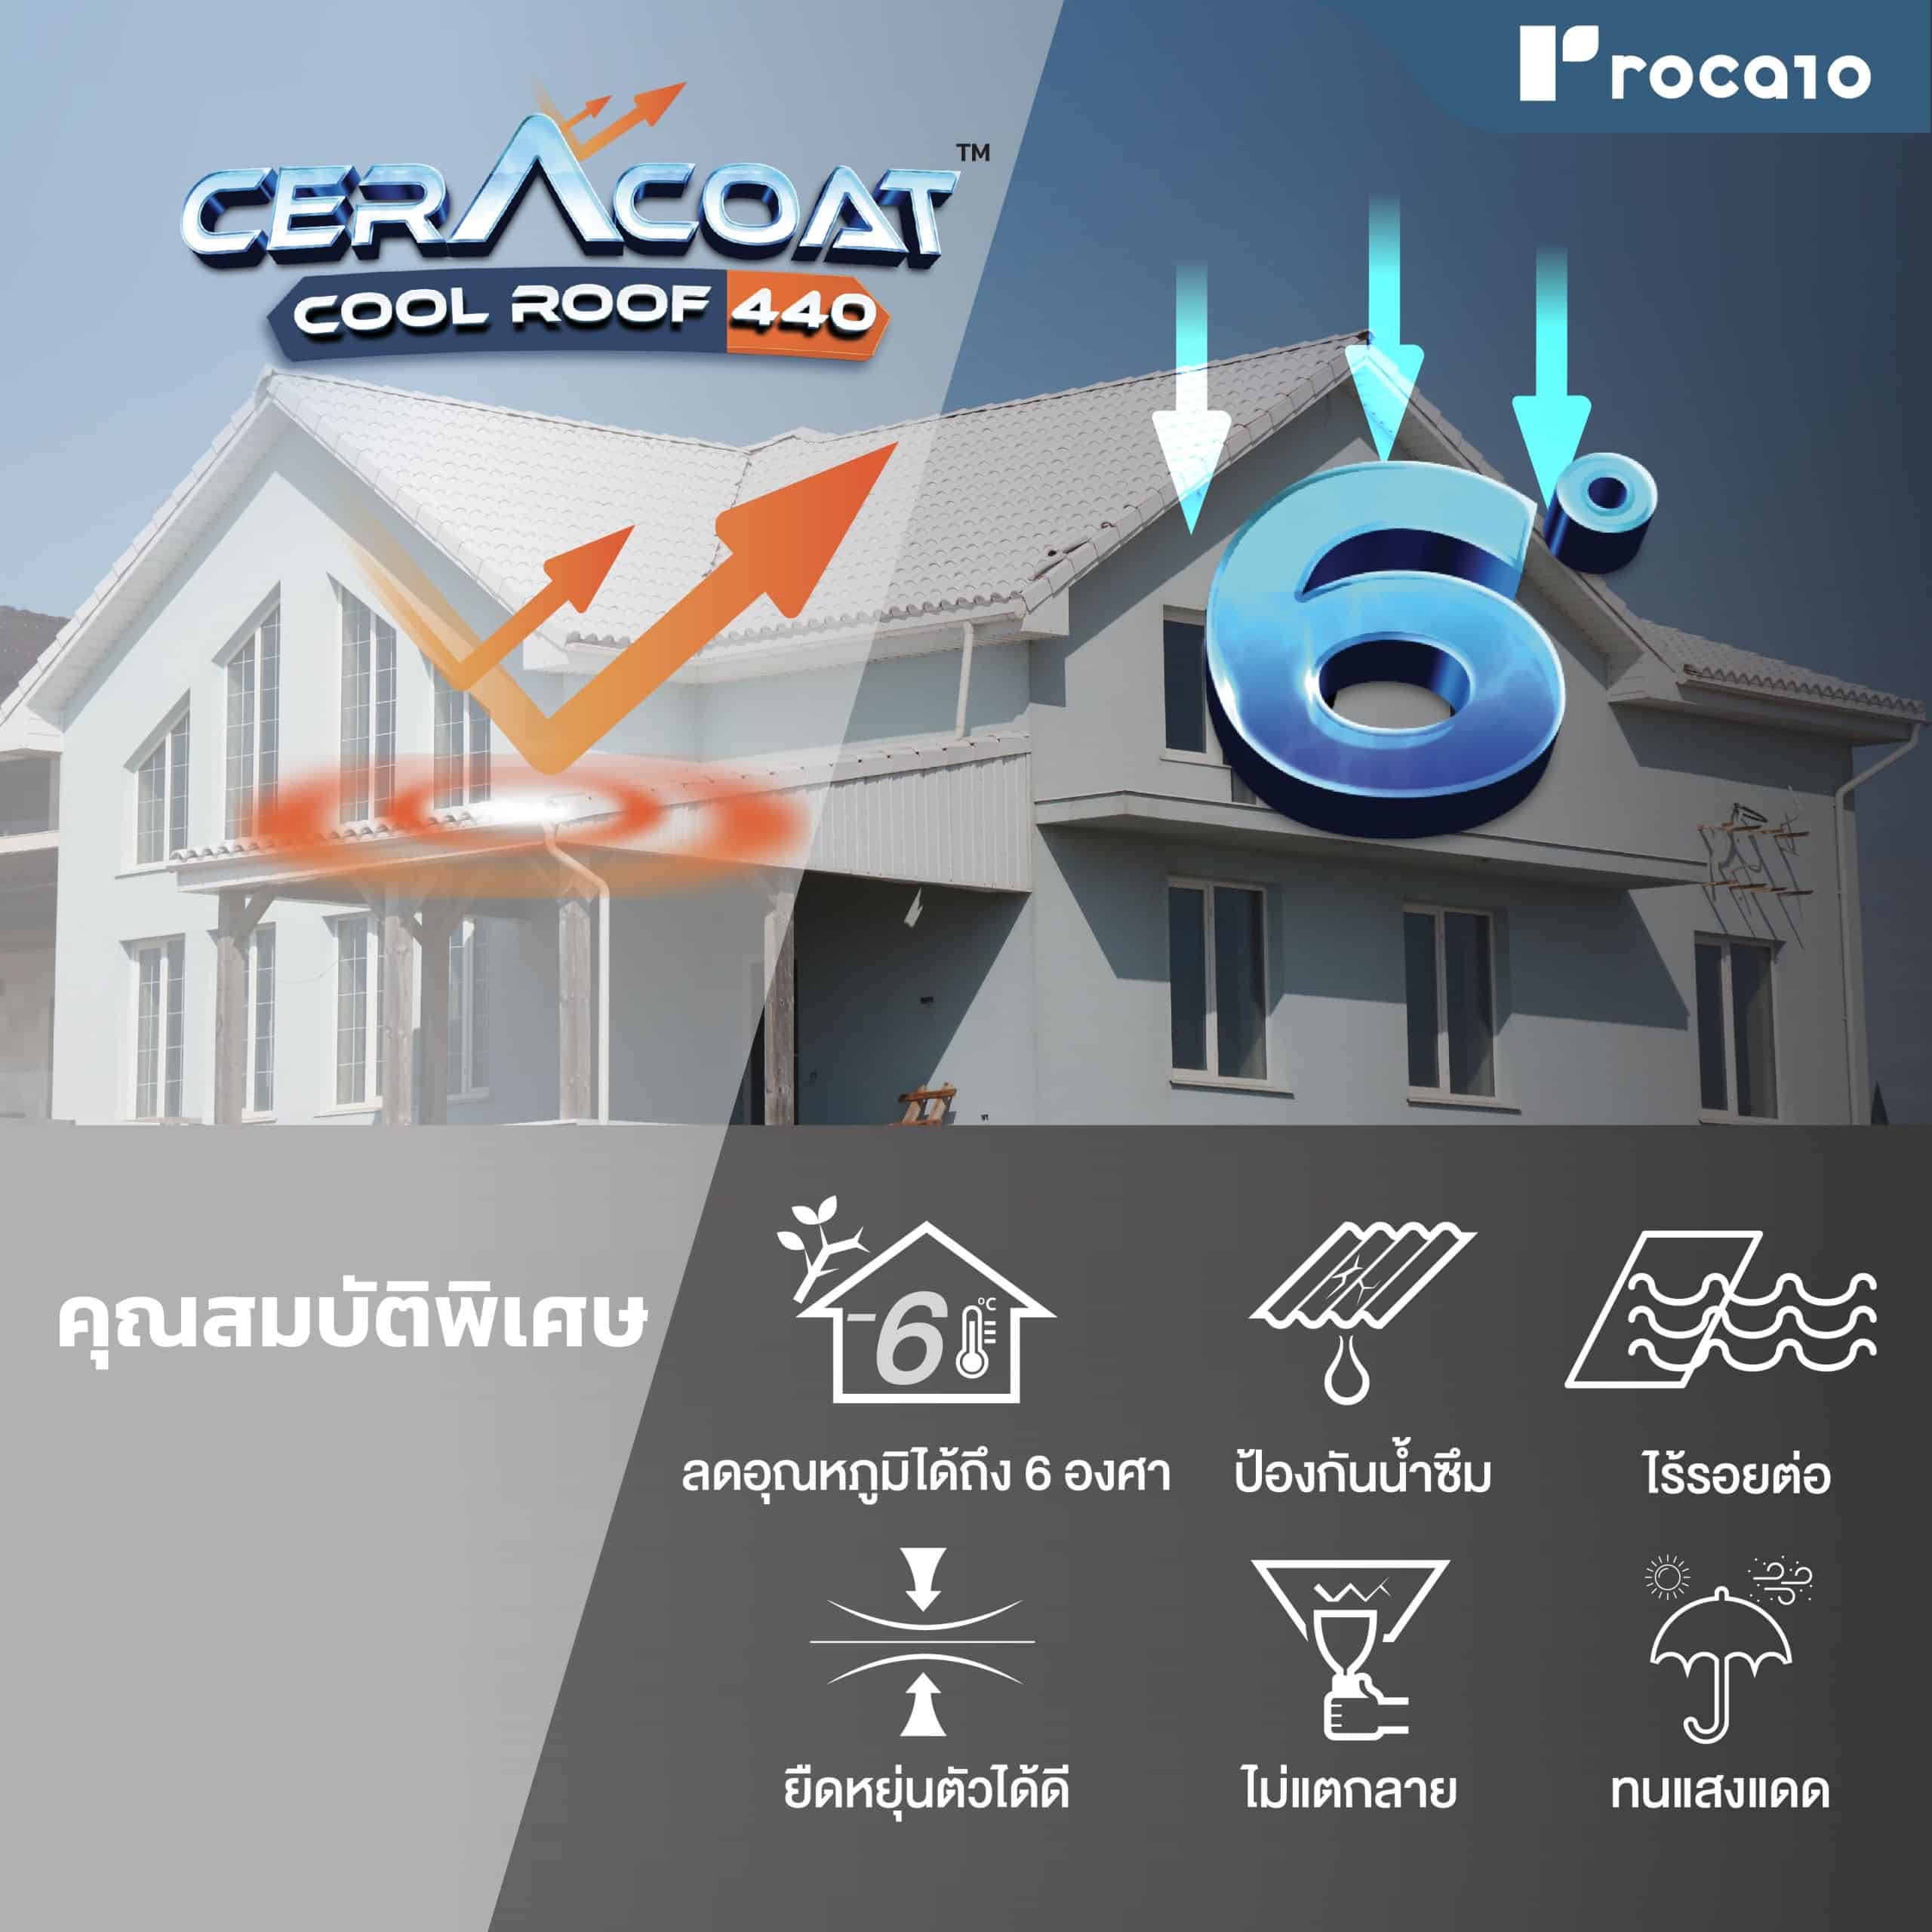 Ceracoat™ 440 Thermal Reflective Roof Insulation - Roca10 Floor Finishing  Solutions